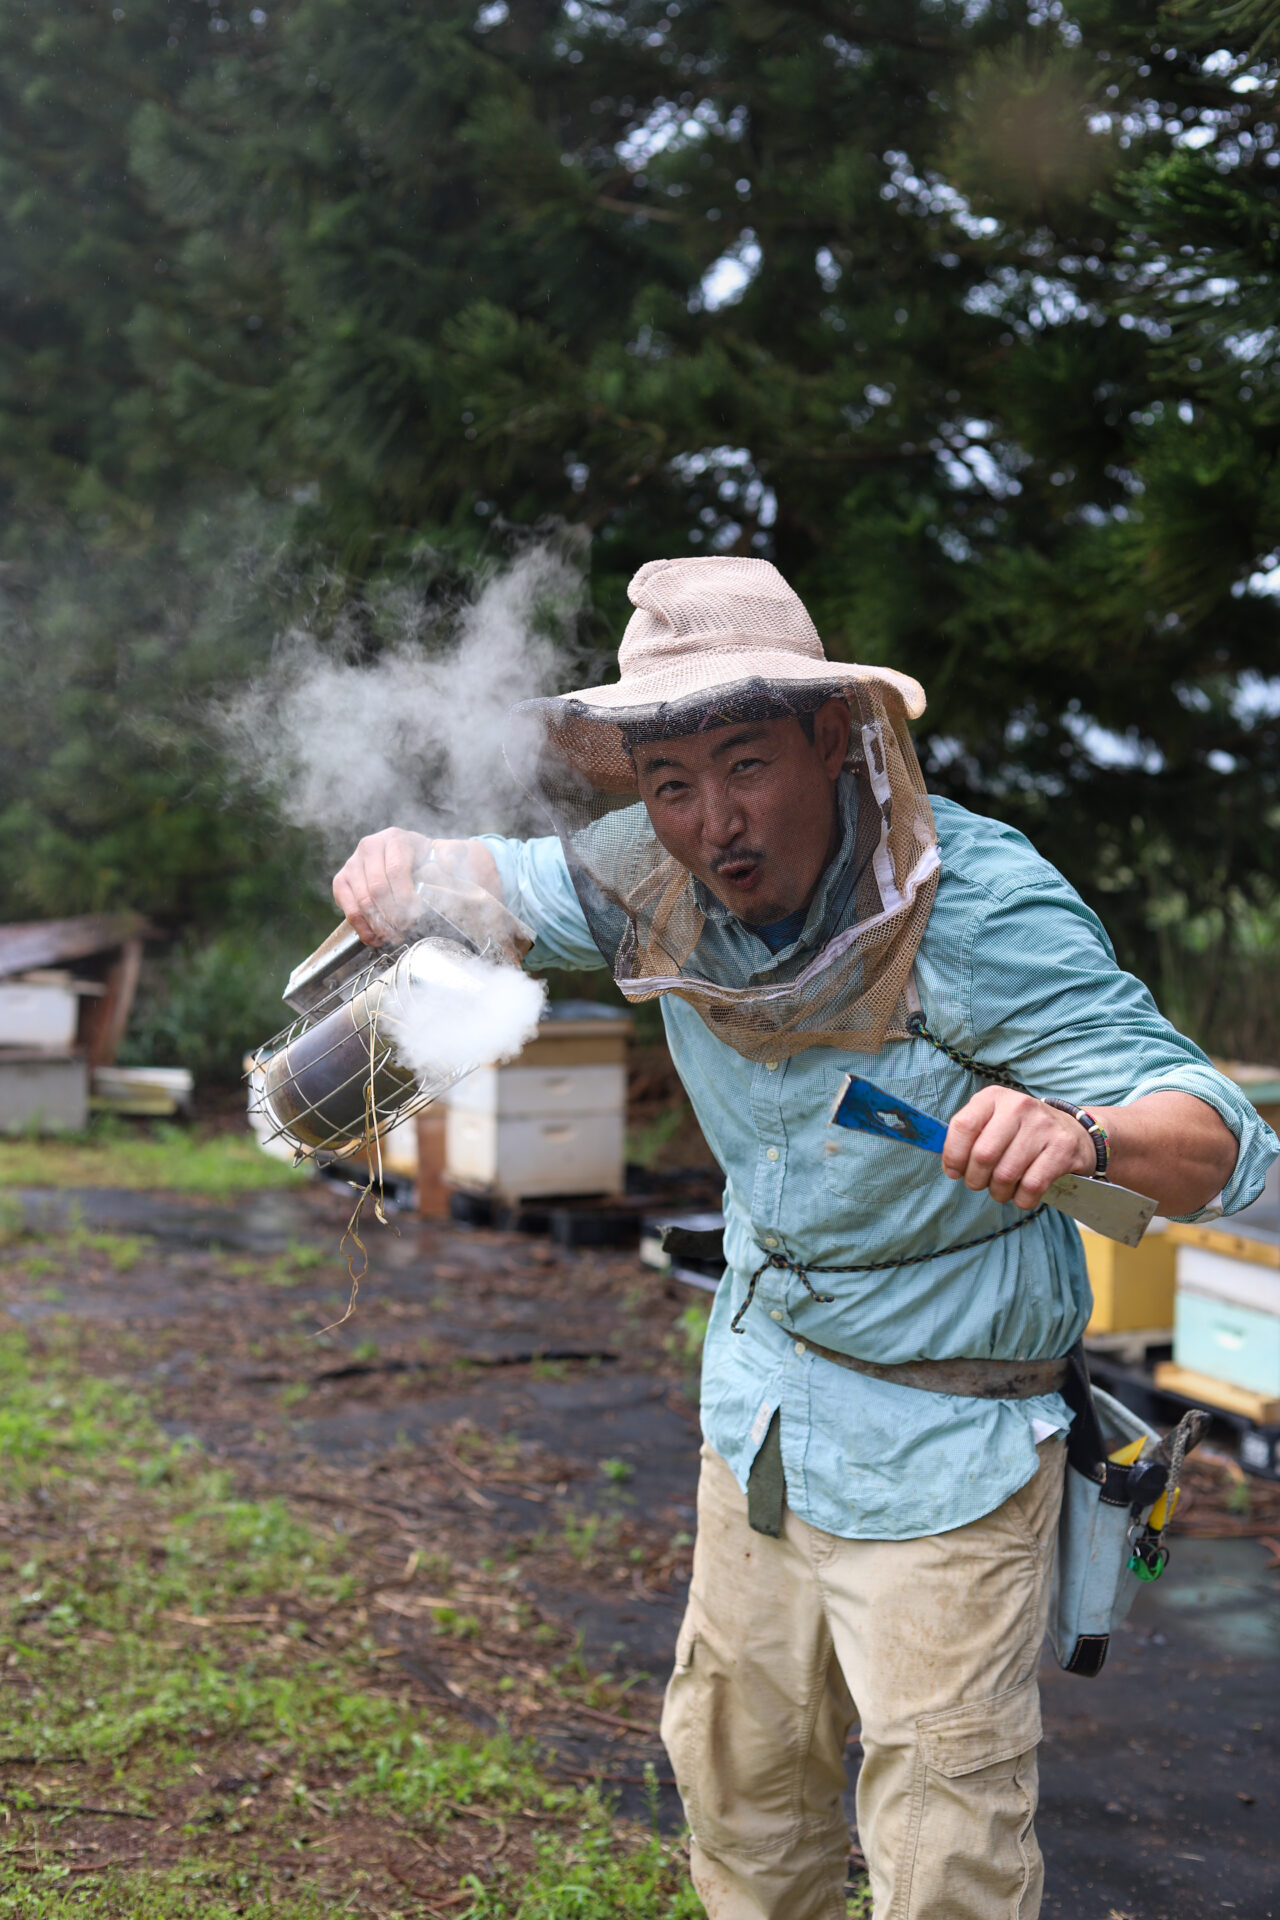 Local Oahu beekeeper, Kino Bees, in protective gear using a smoker among beehives in a forested area, harvesting THC-infused honey.